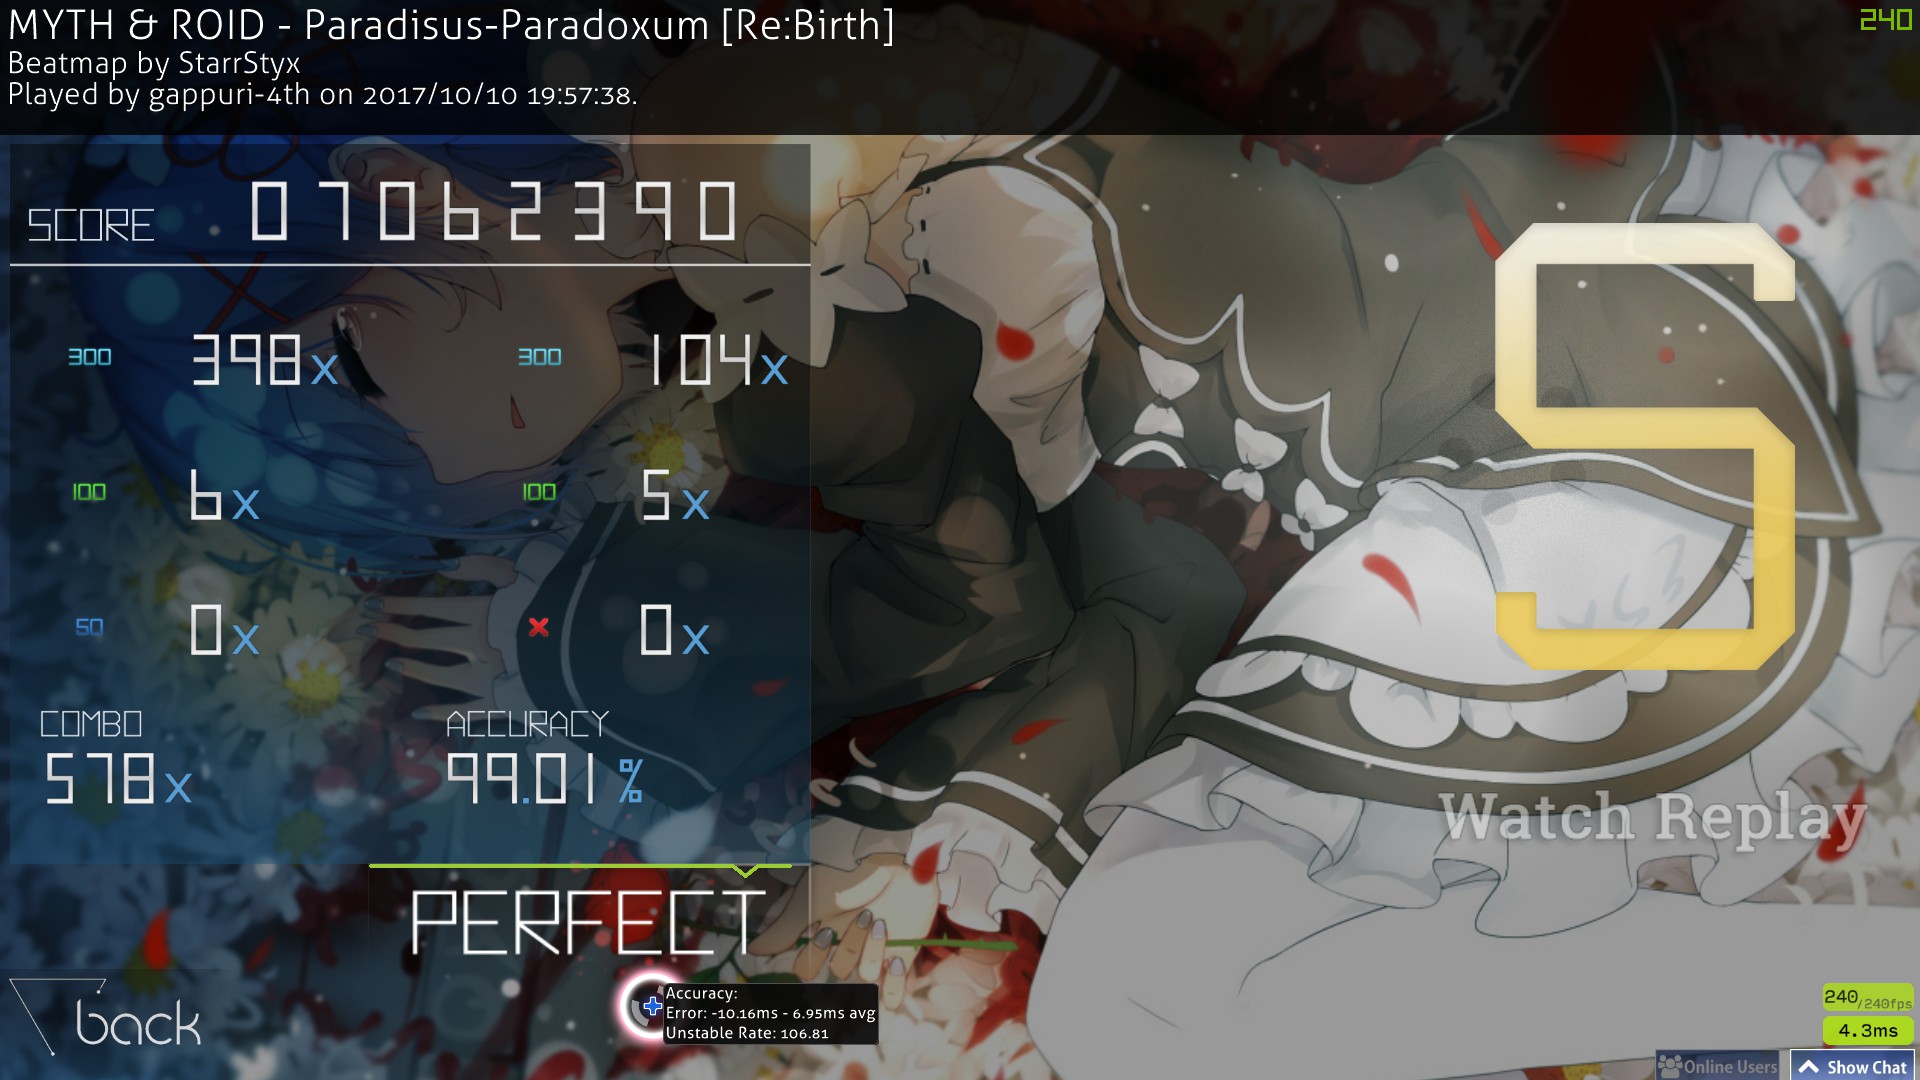 Osu 6000pp越え達成 This Is Between Us